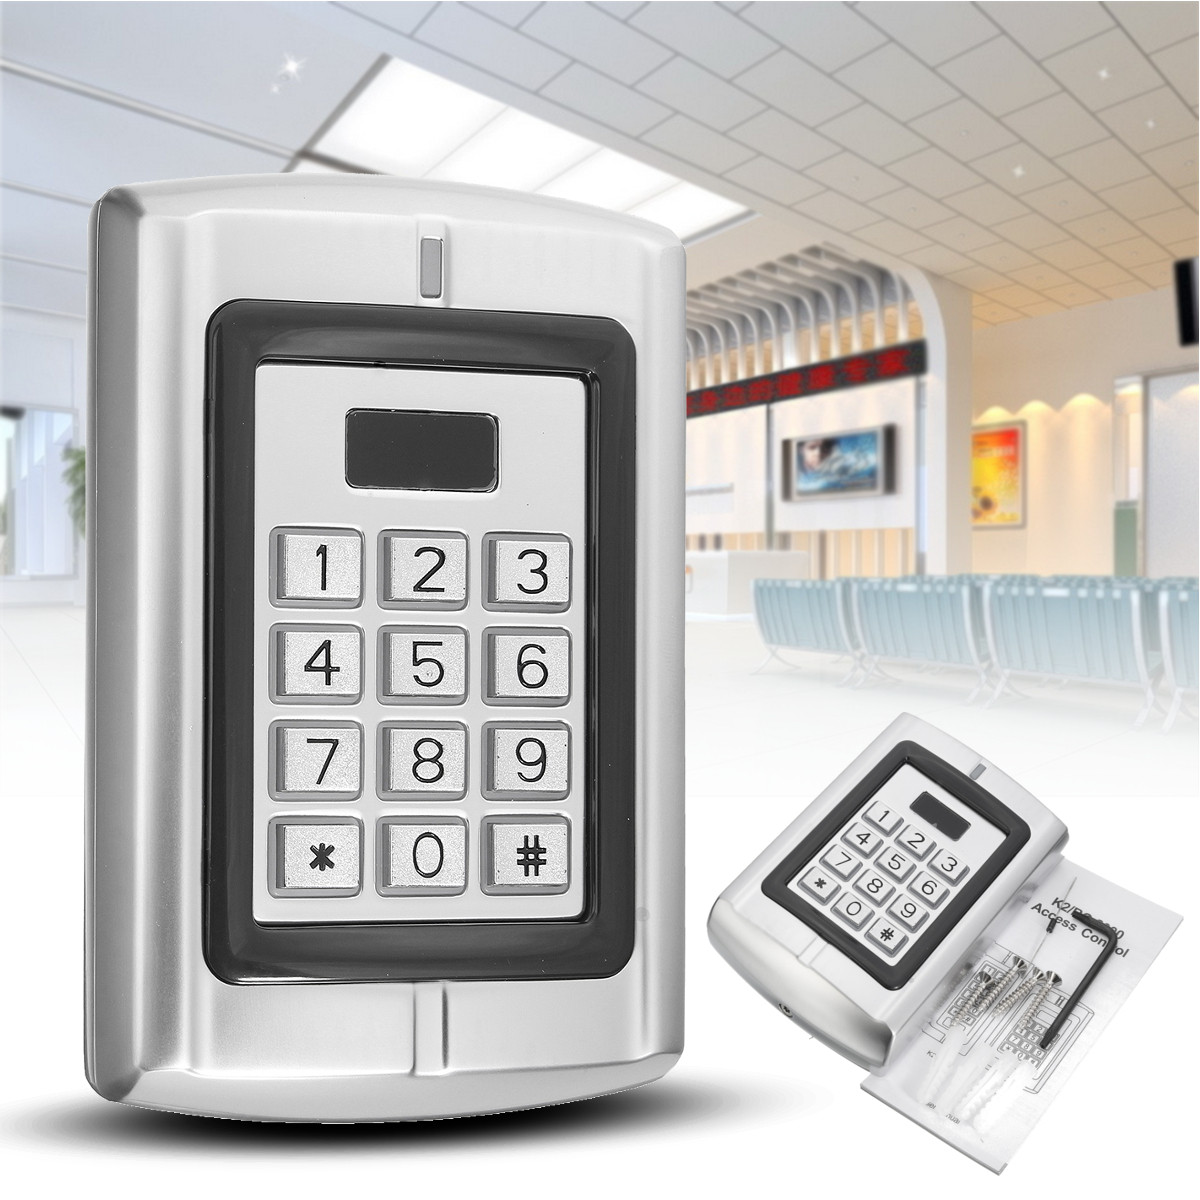 

BC-2000 Password Keypad RFID Card Reader Entry Door Lock Access Control Security System